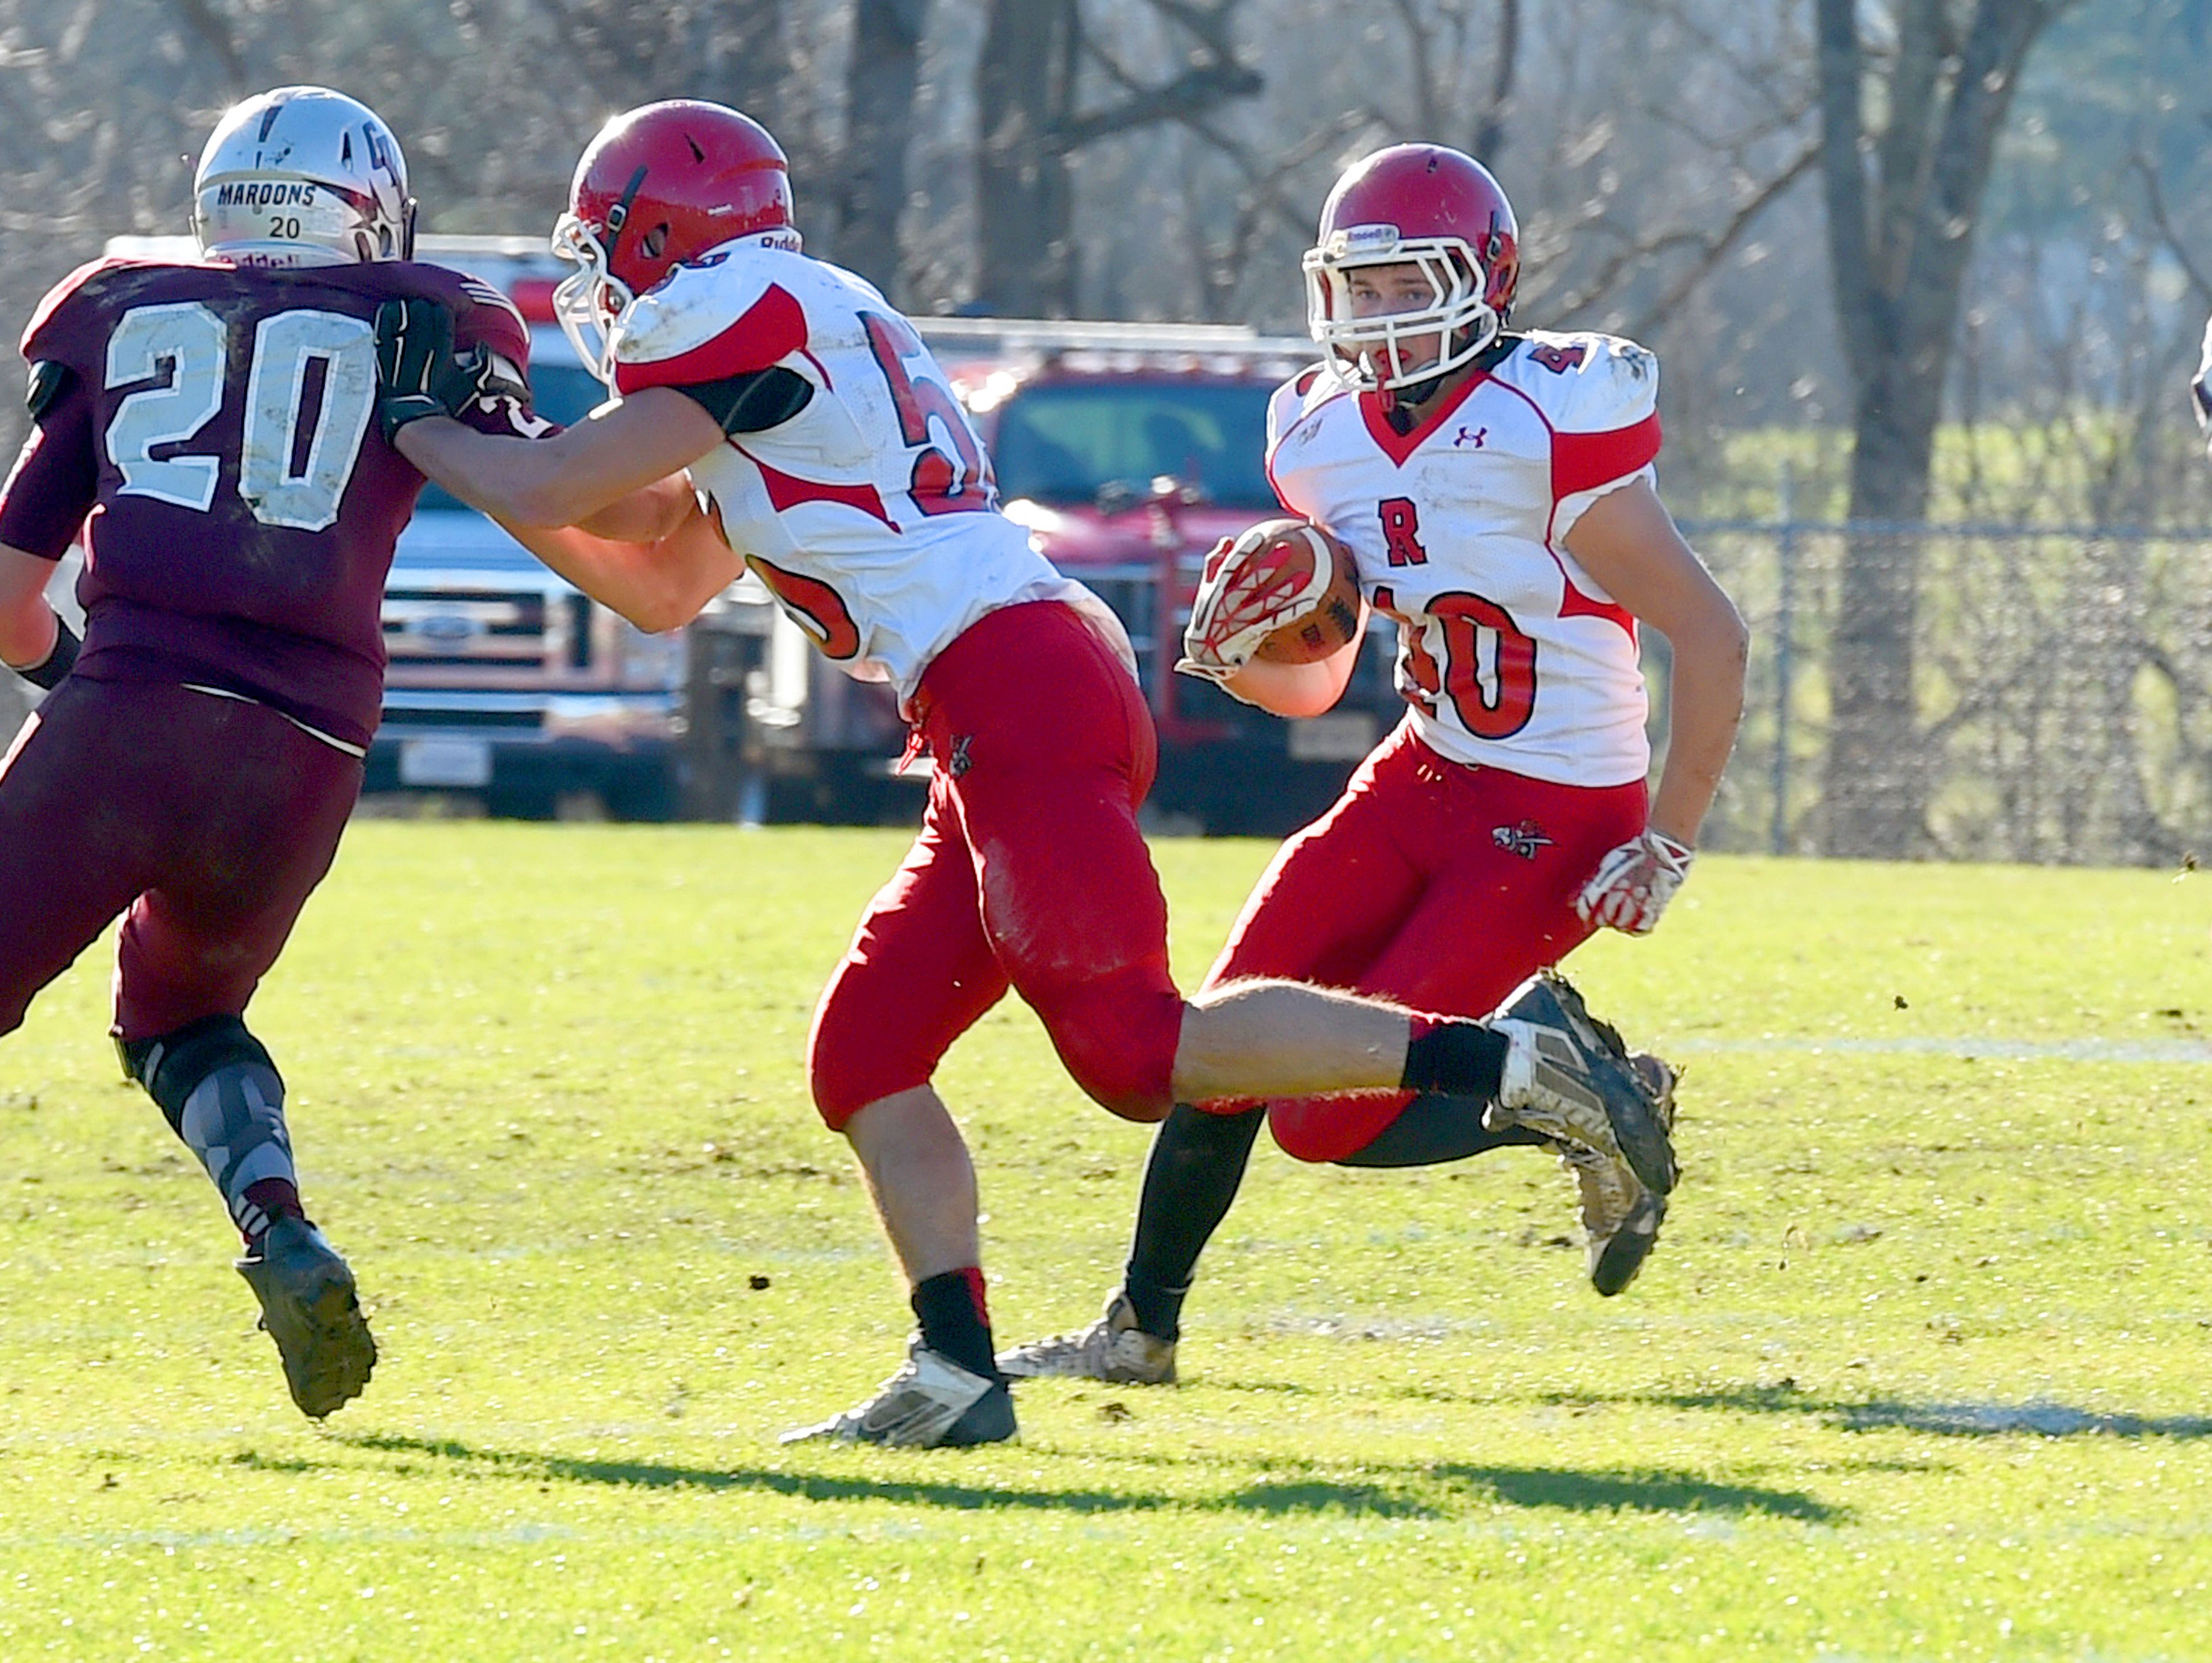 Tradition of success for Riverheads football USA TODAY High School Sports